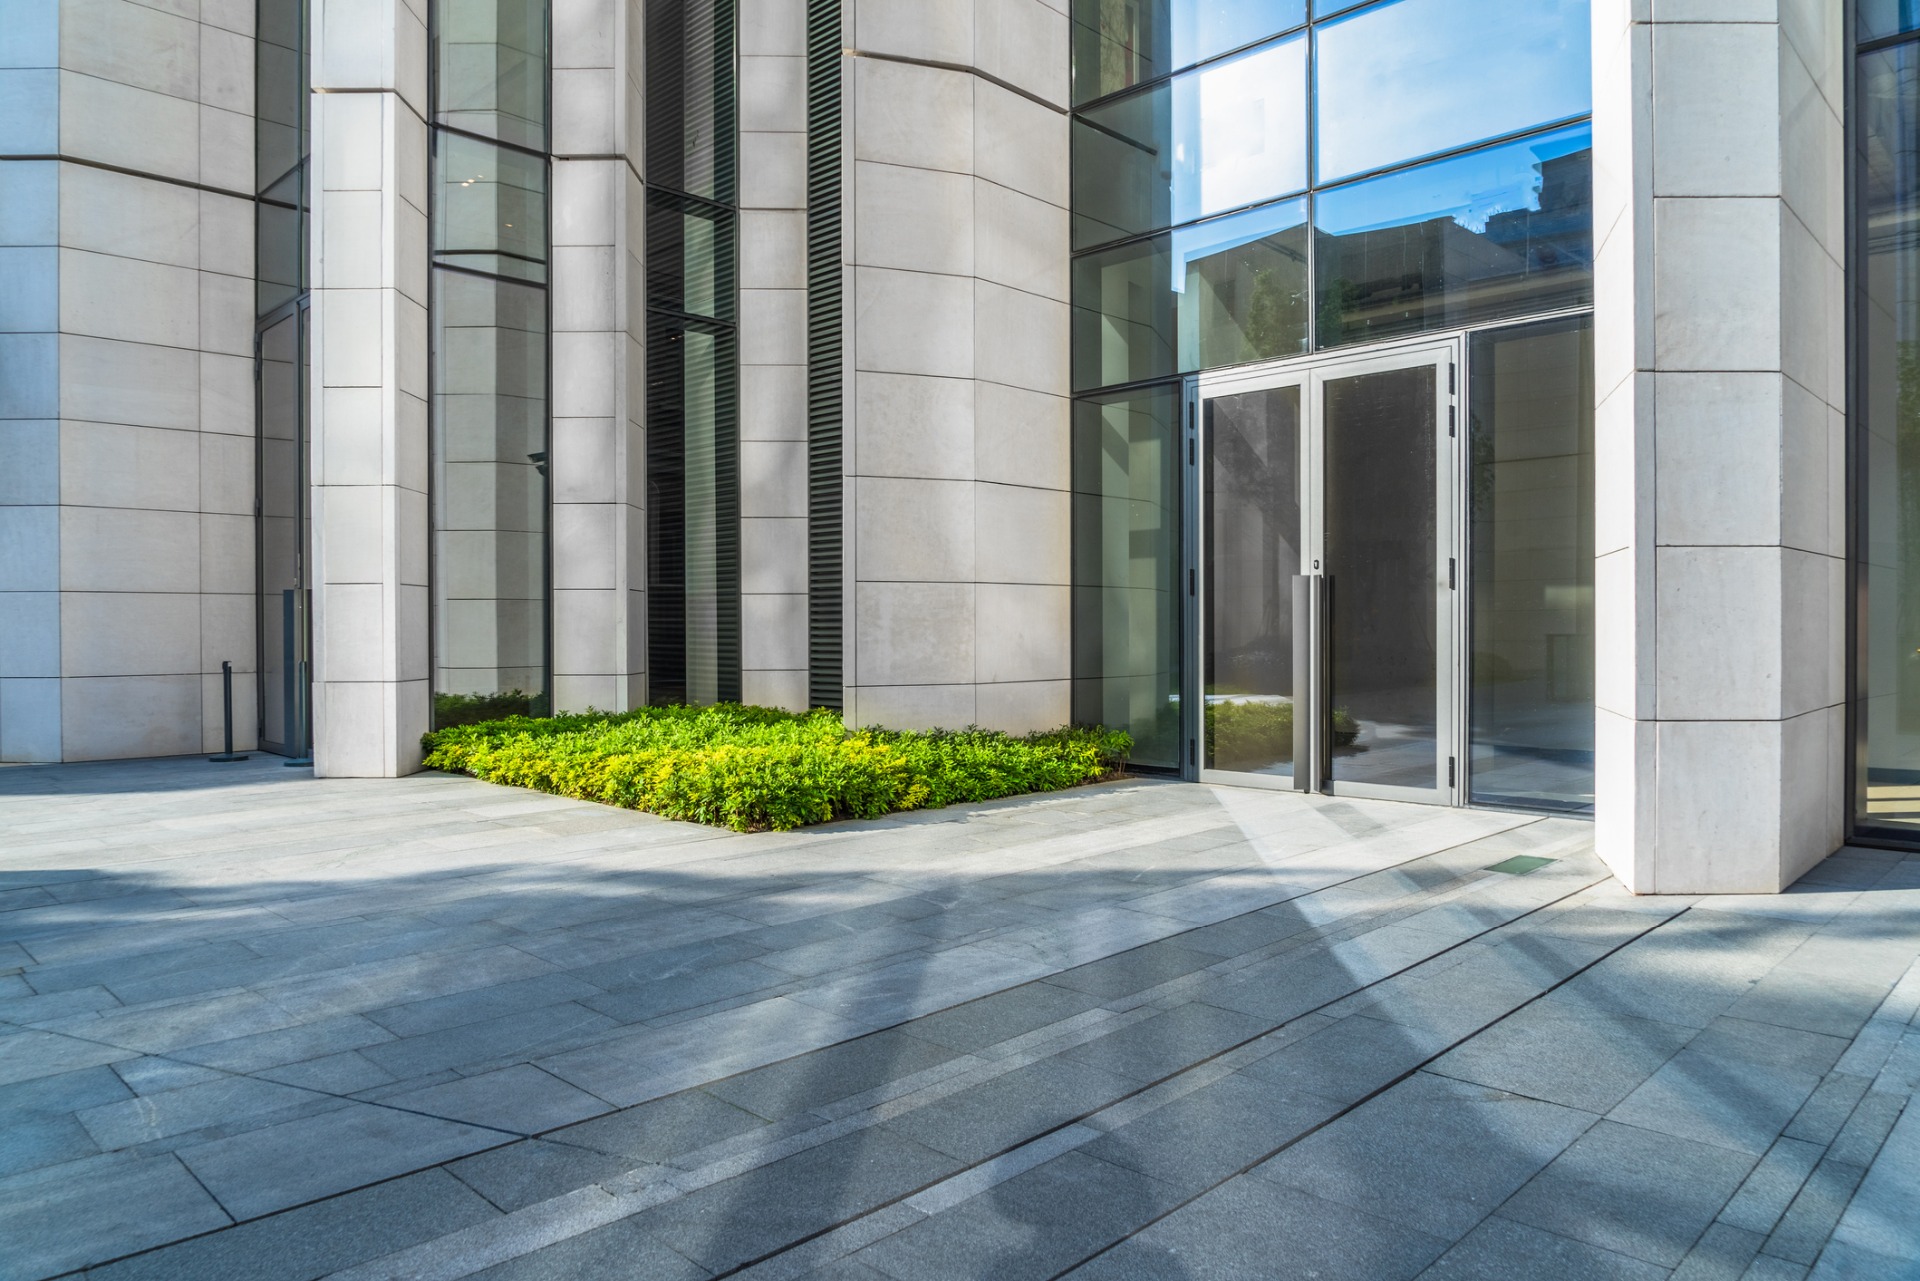 Double glass doors installed on corporate building with glass windows for walls